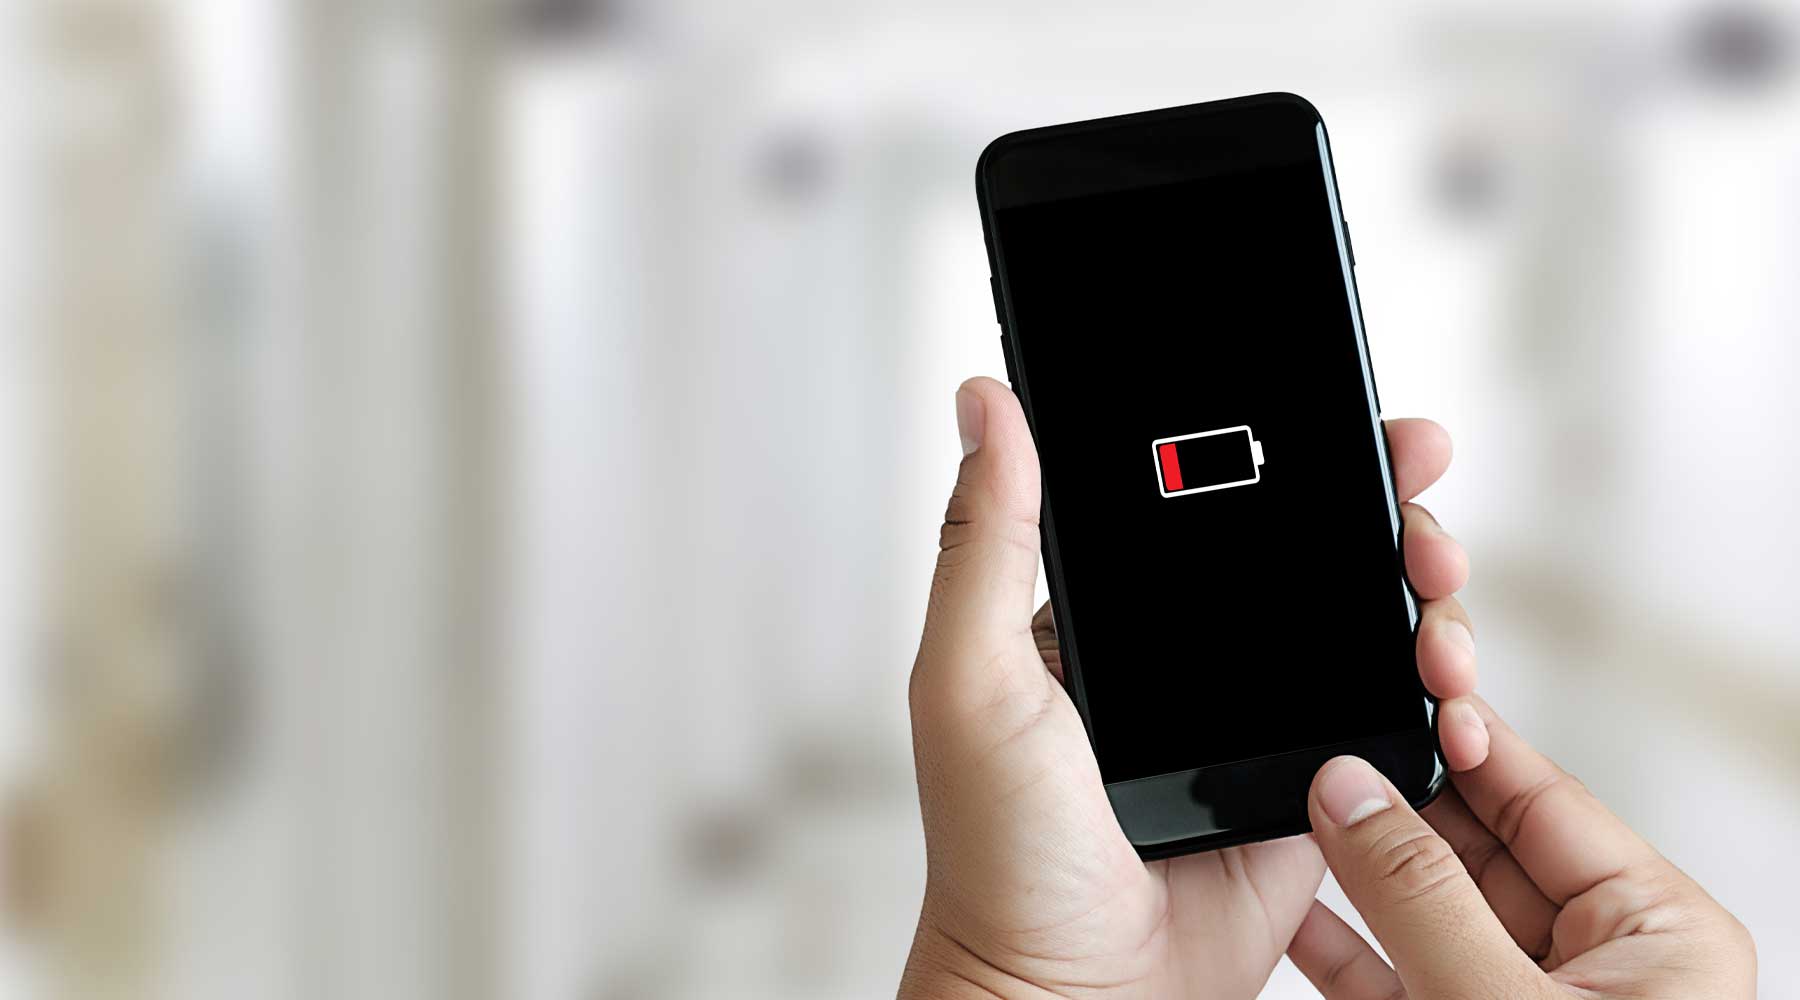 How to improve battery health of your phone? 7 tips to increase its lifespan.